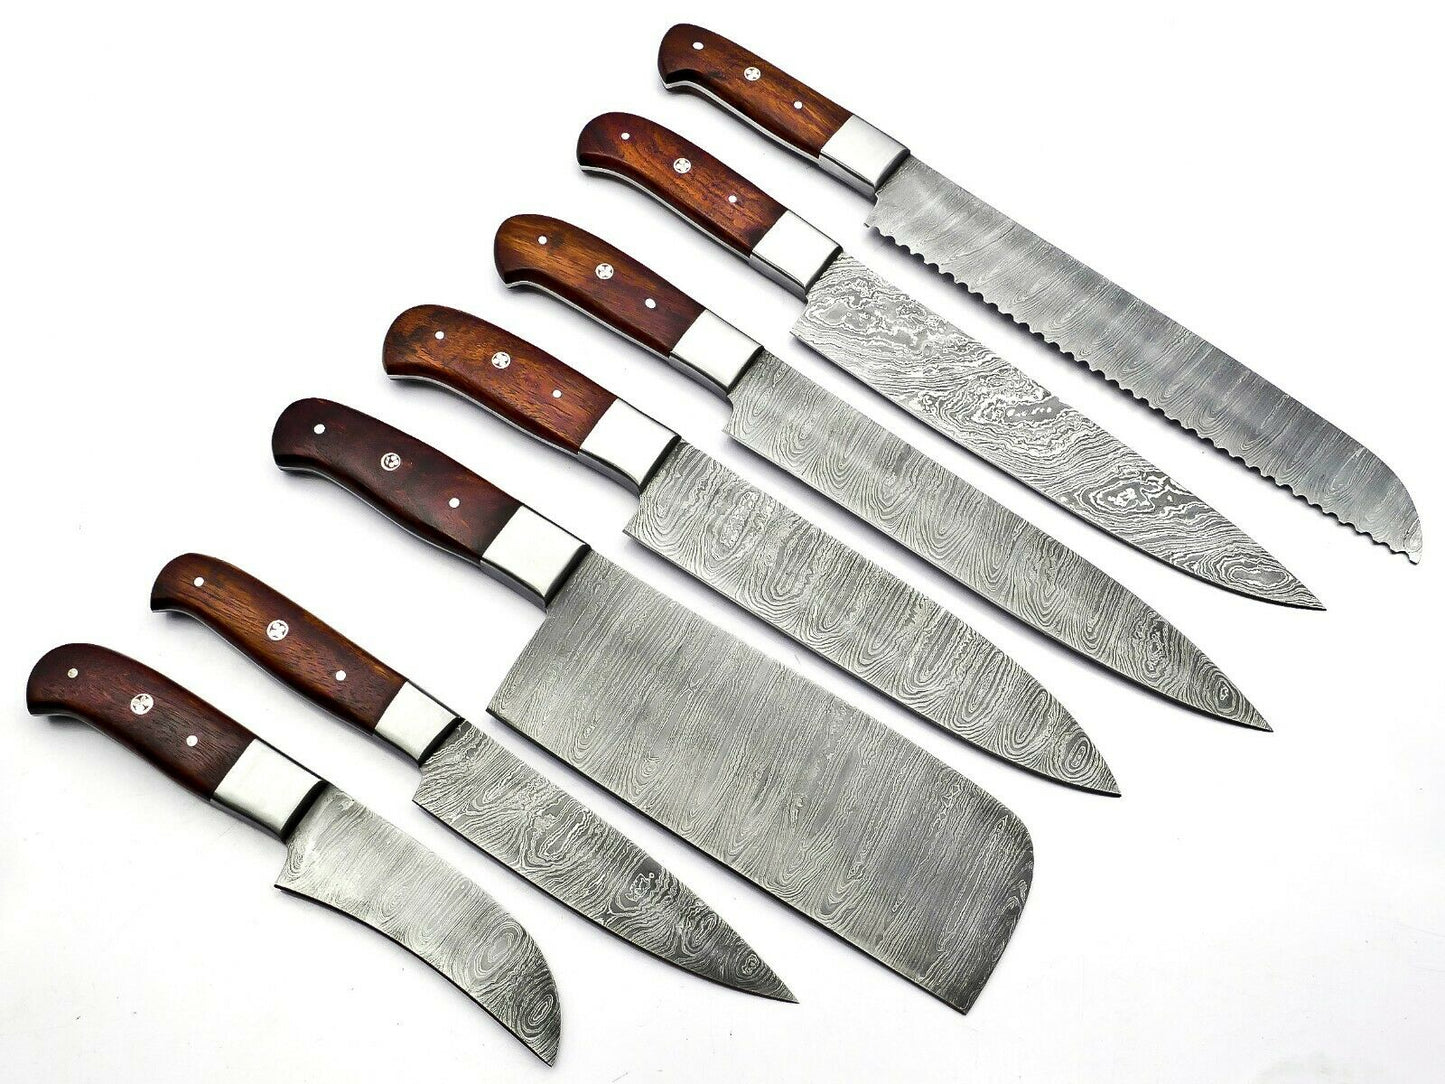 Handmade Damascus Steel Kitchen Knife Set 7 pcs Full Tang With Leather Bag